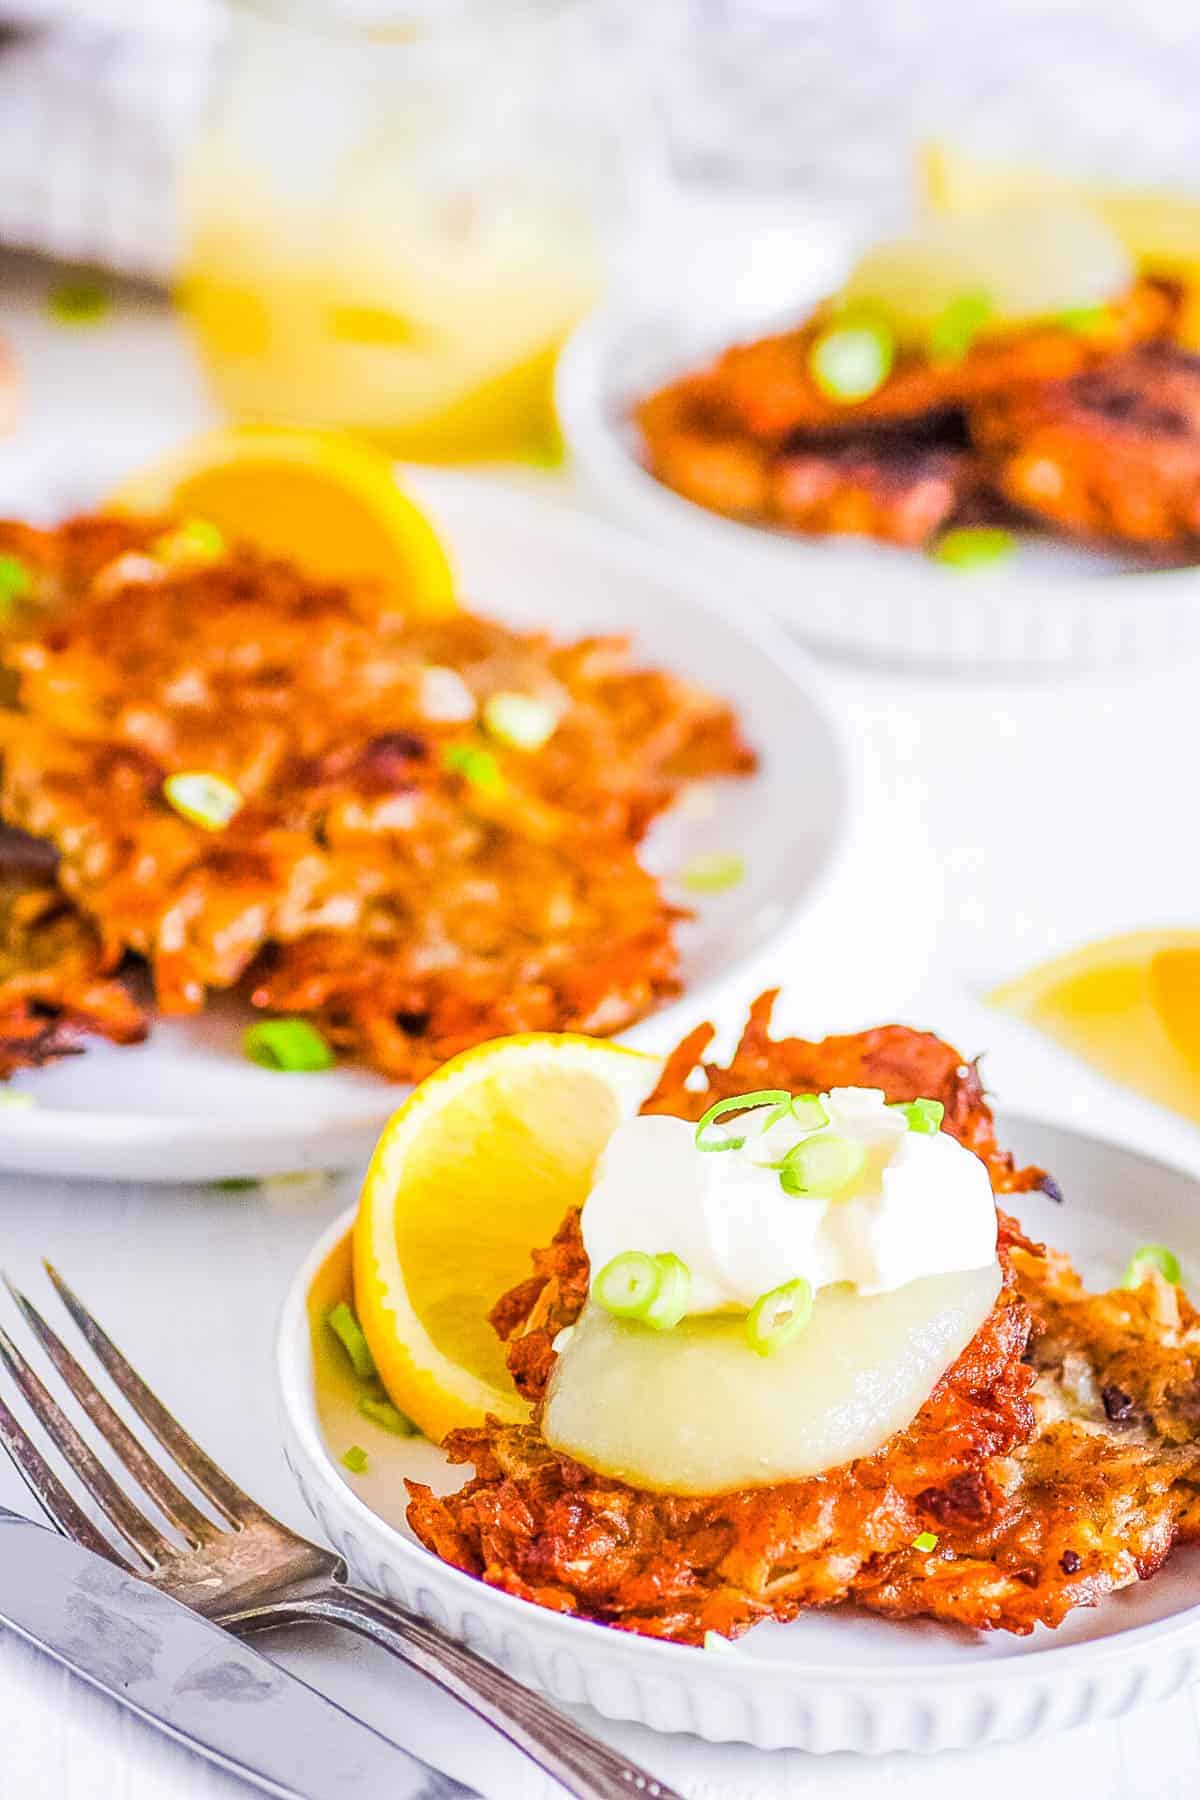 Potato pancakes topped with sour cream and green onions, with a lemon wedge, served on a white plate.